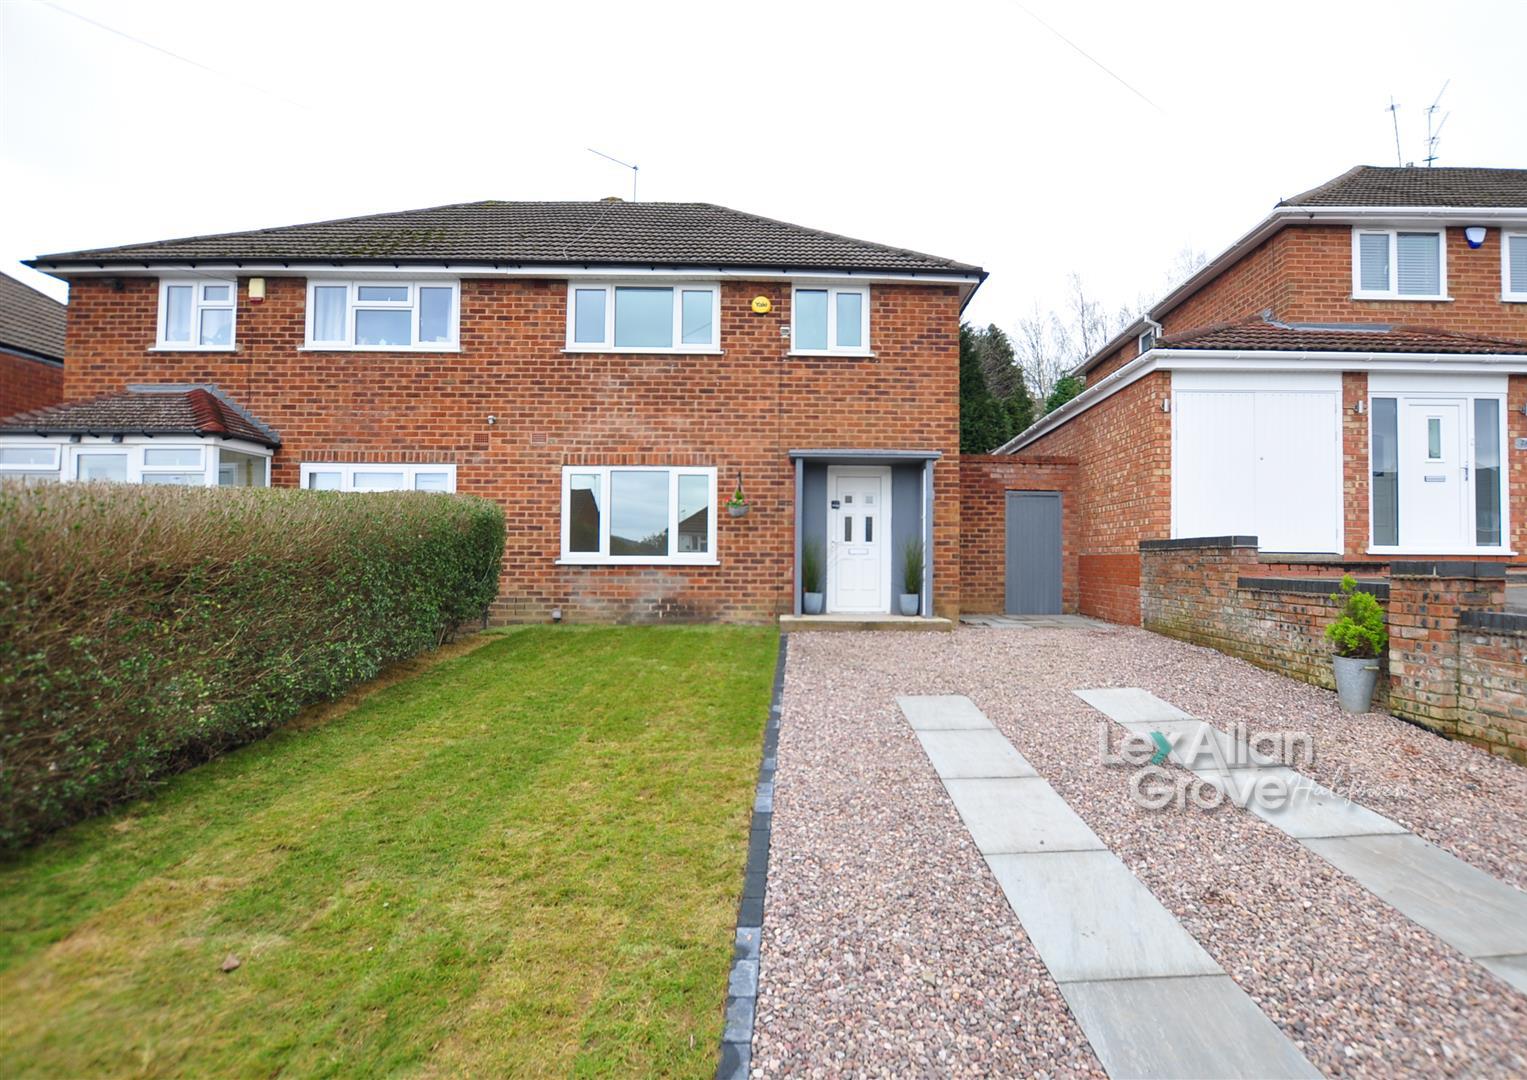 3 bed semi-detached house for sale in St. Johns Road, Halesowen - Property Image 1